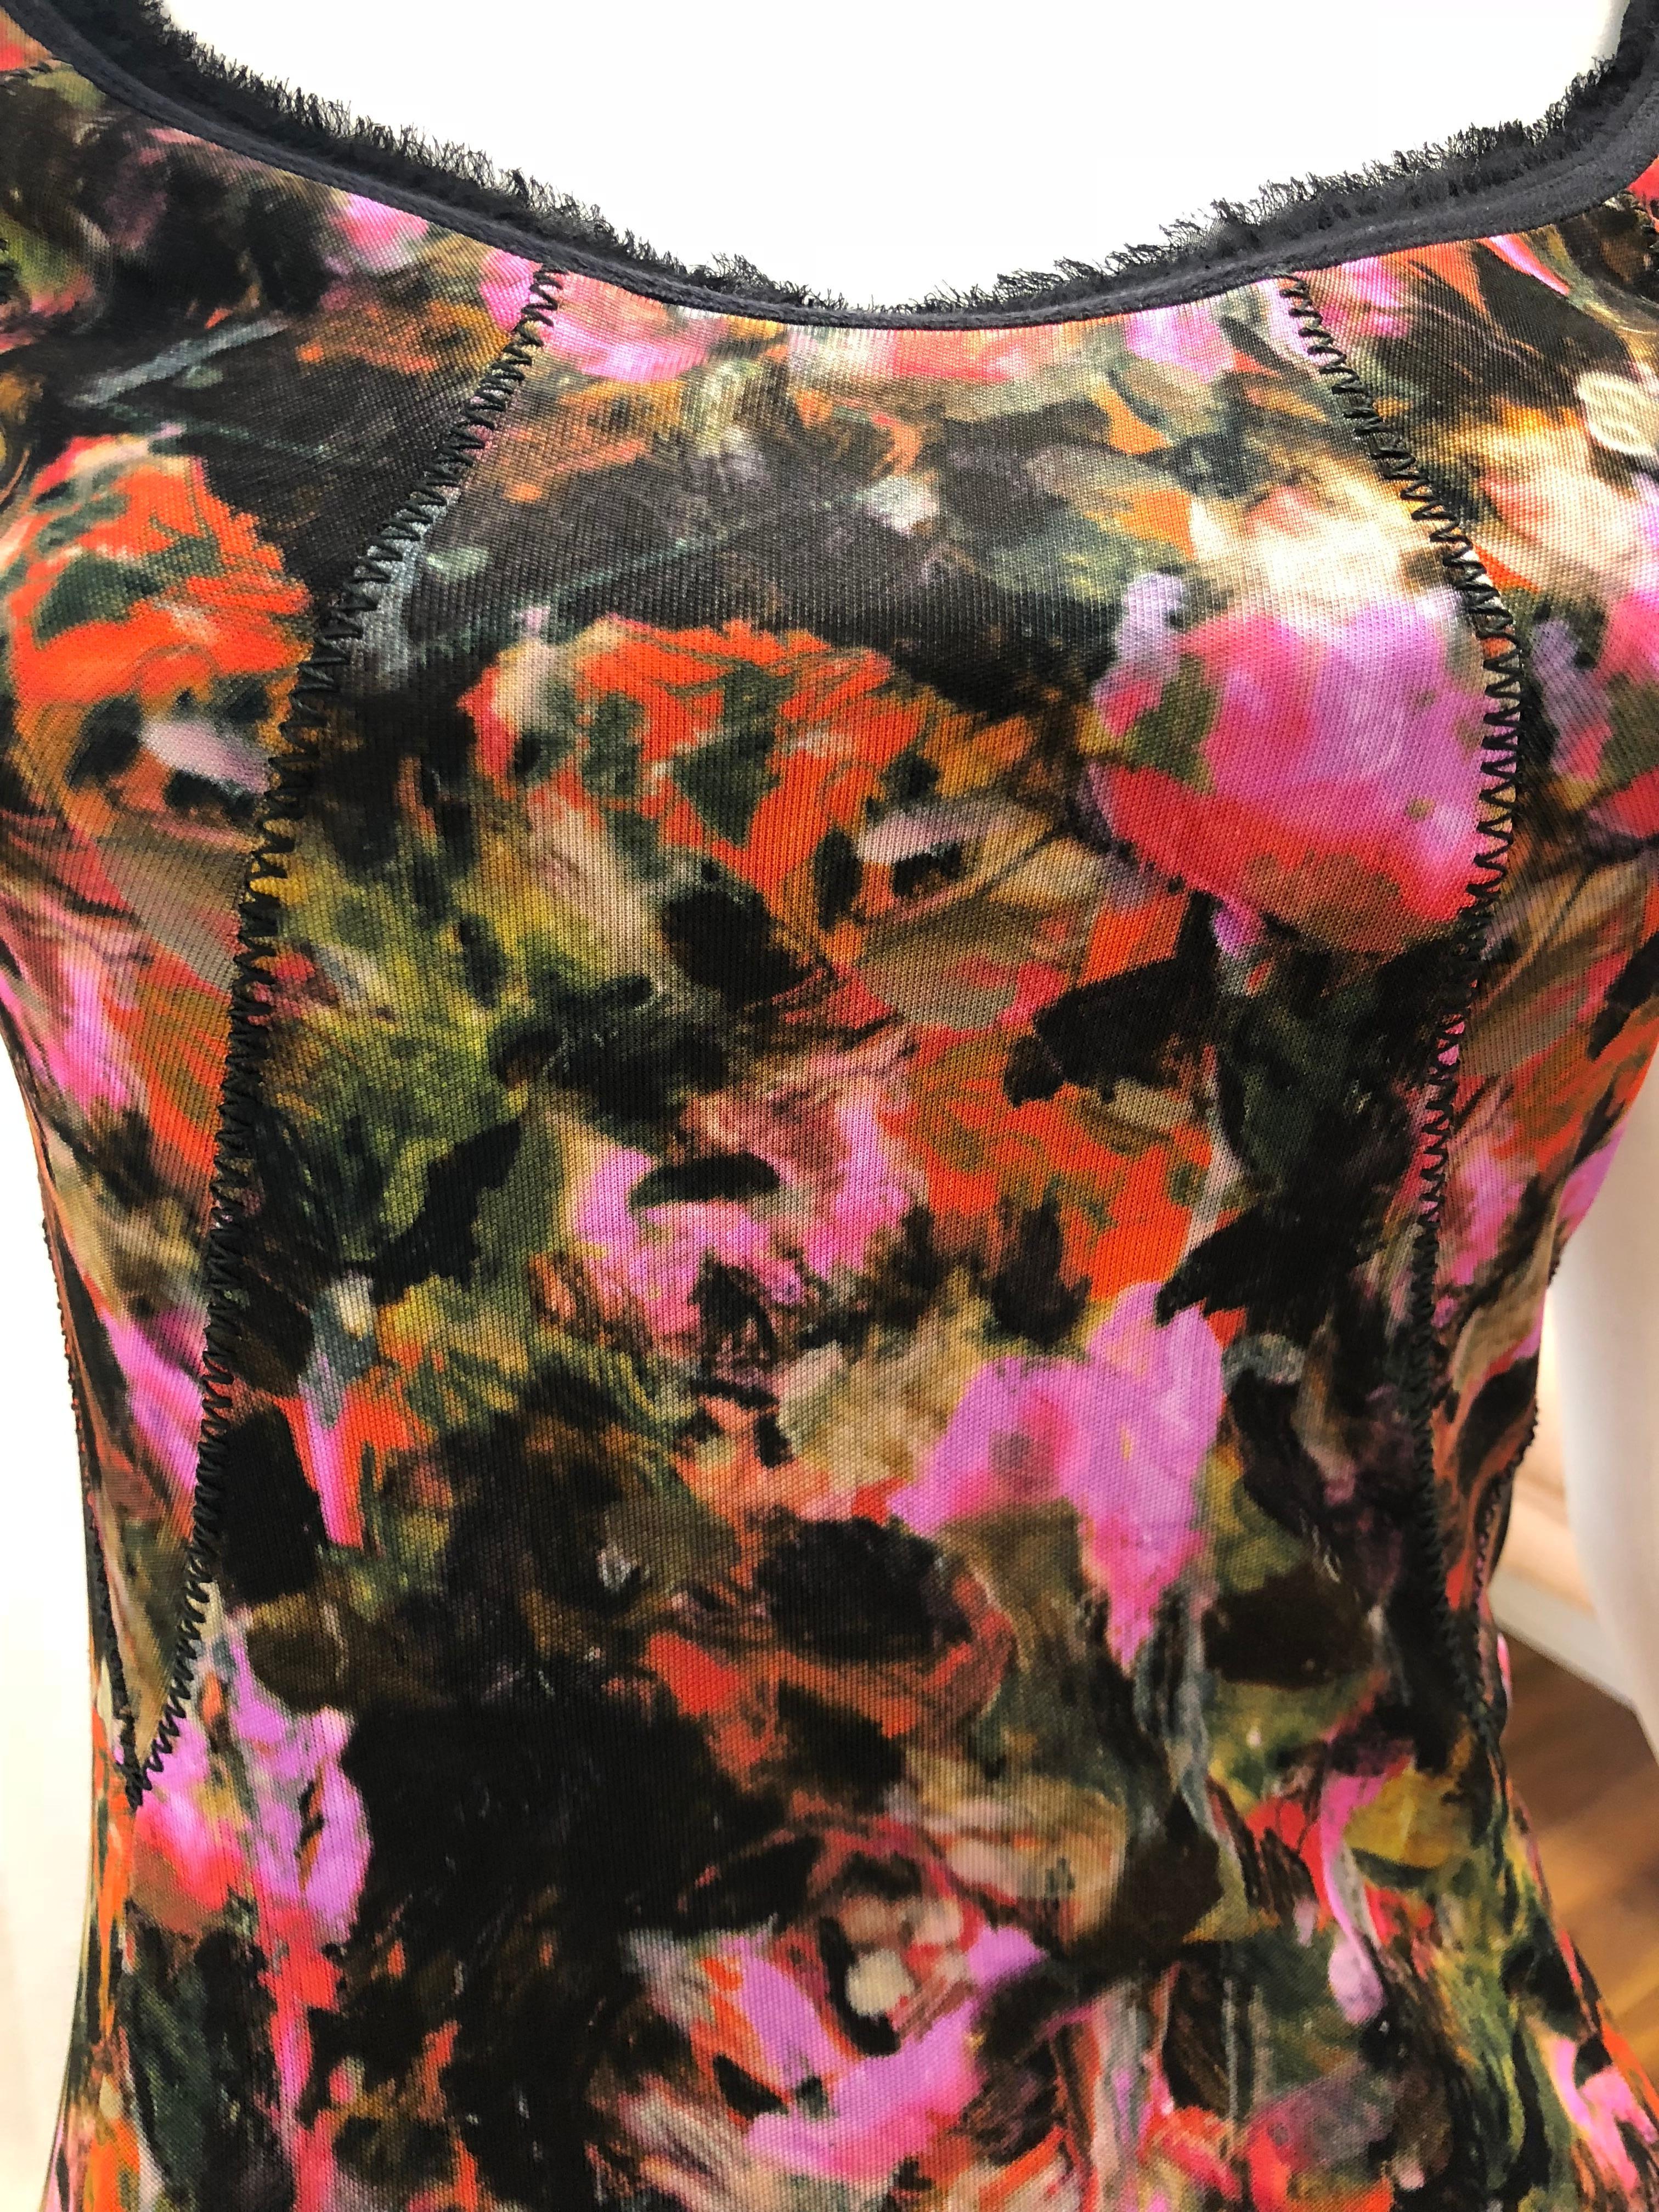 As worn by Jennifer Garner at a Save the Children Event. This floral dress has black feathery chiffon trim on the neckline and around the short sleeves.  There is a zig zag detail on the top part of the dress which is replicated on the hem, and the